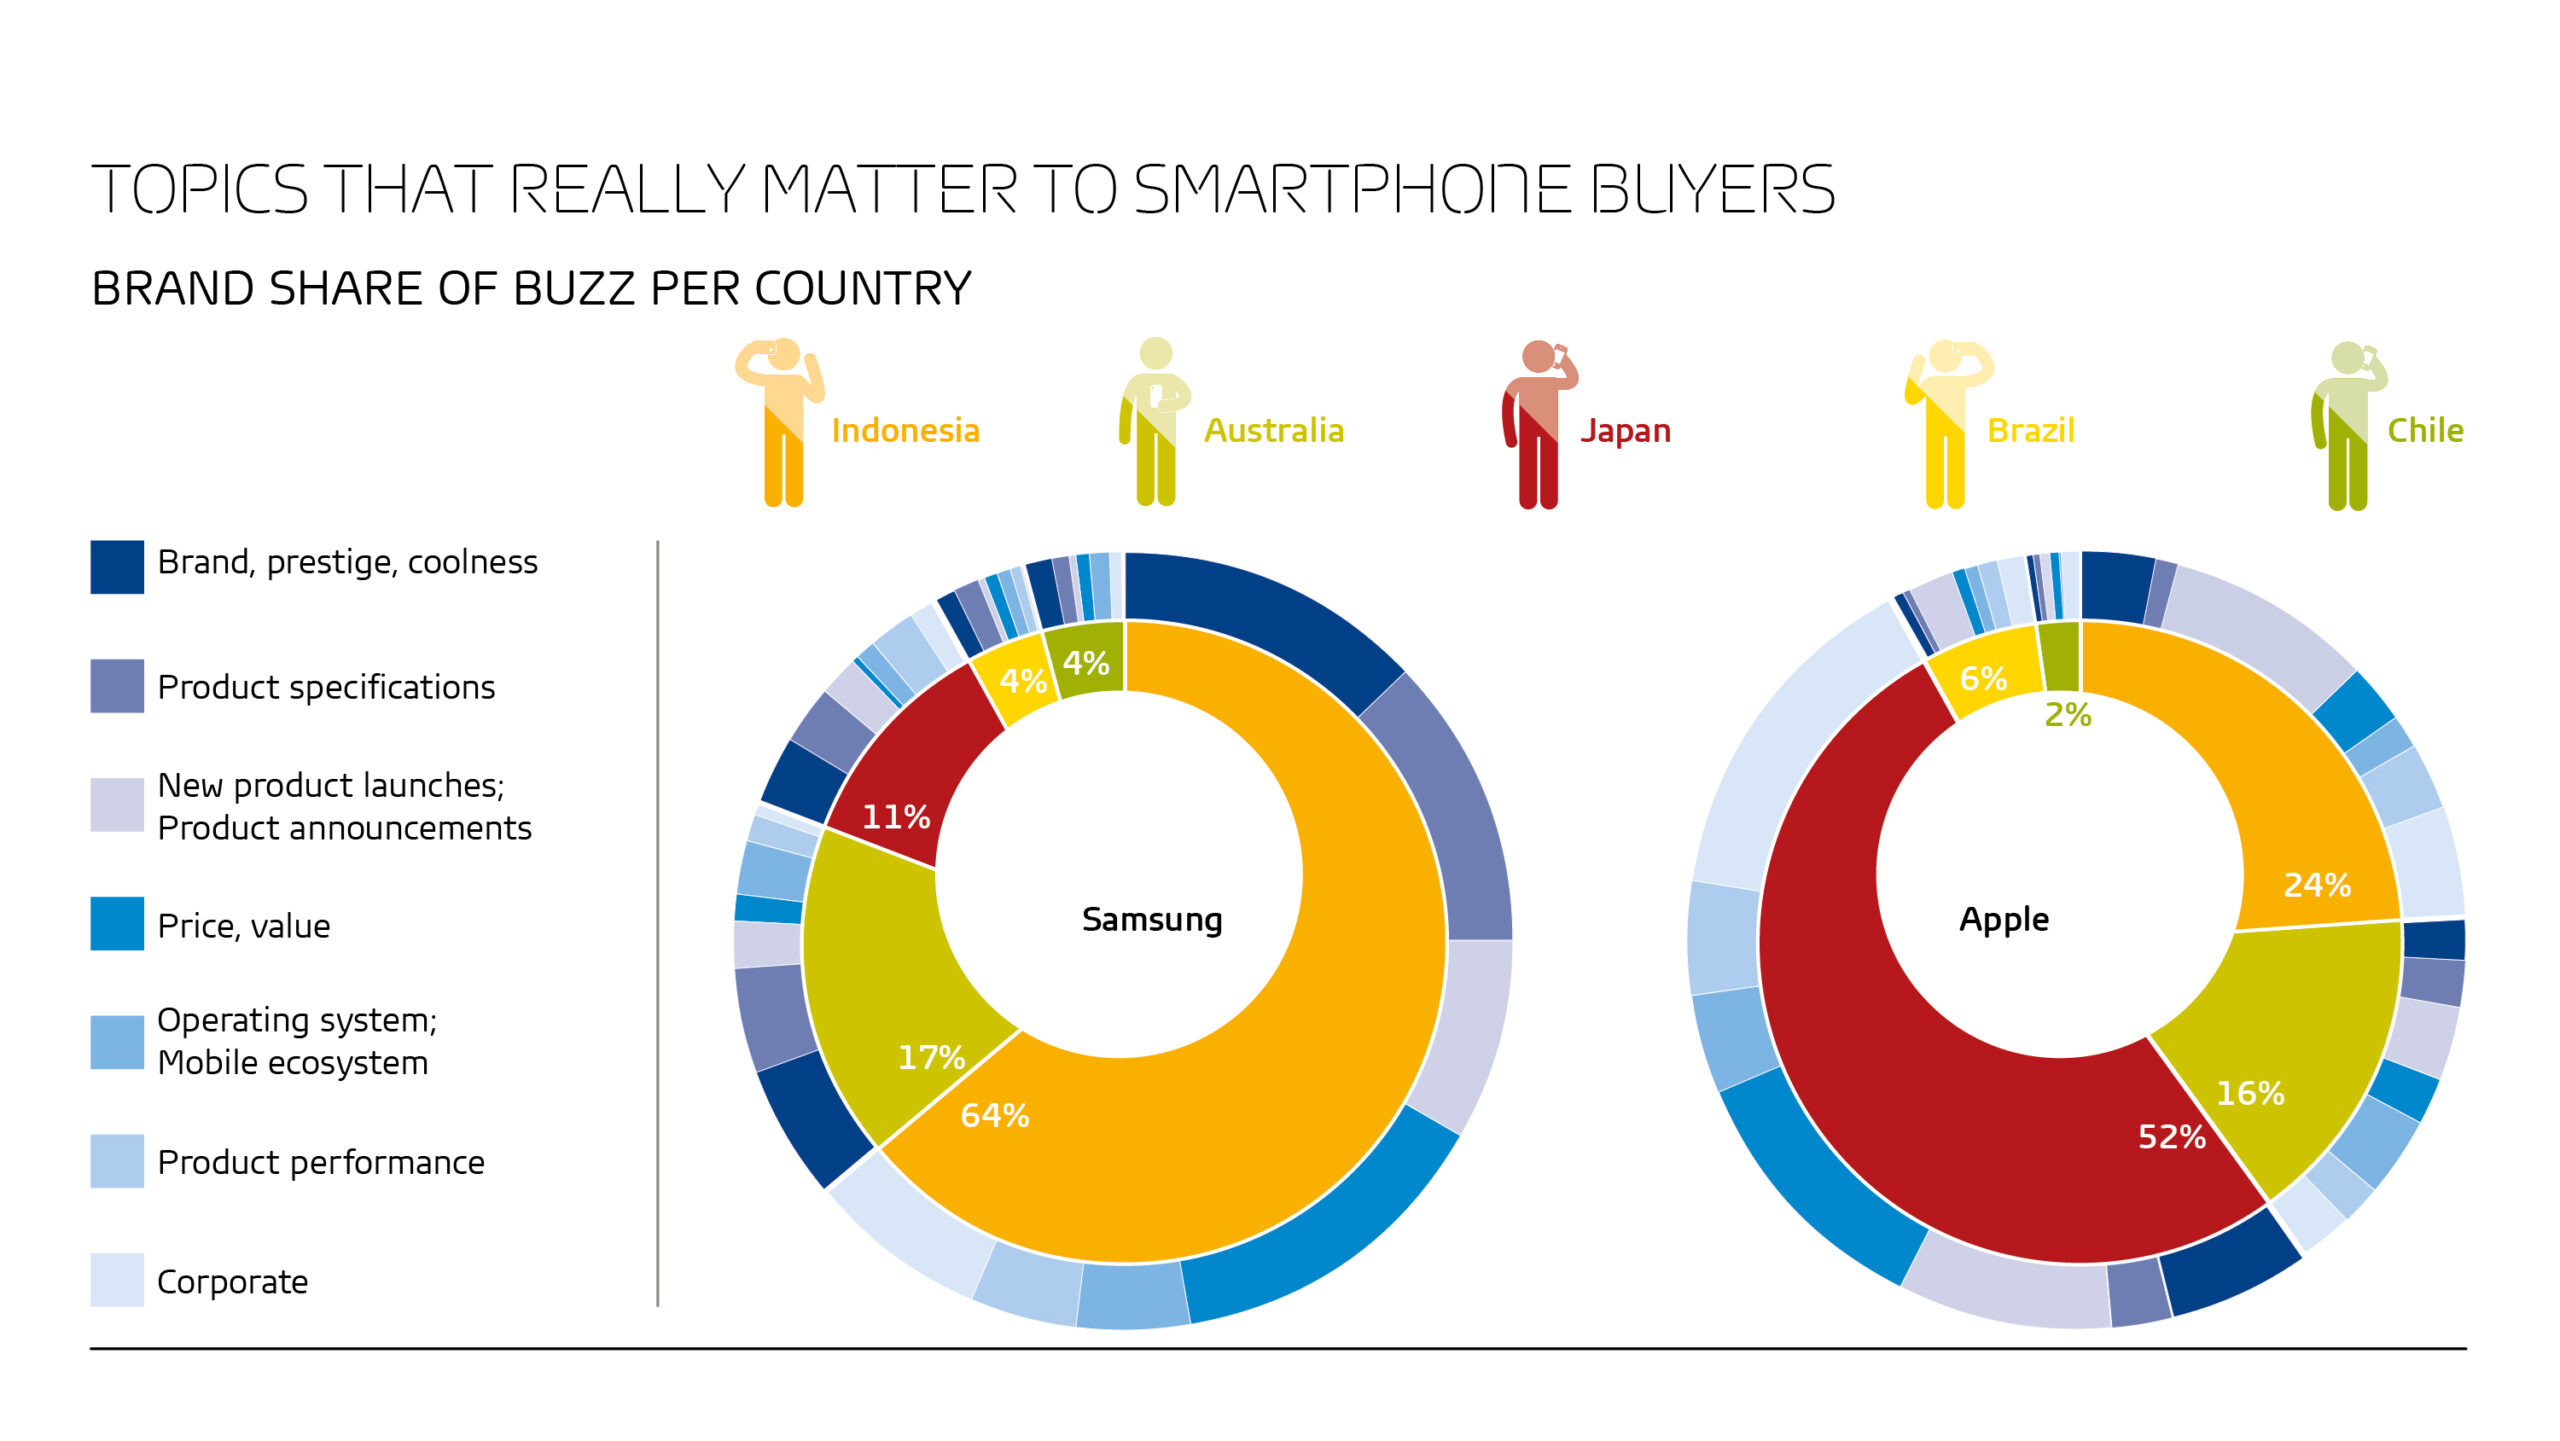 BRAND SHARE OF BUZZ